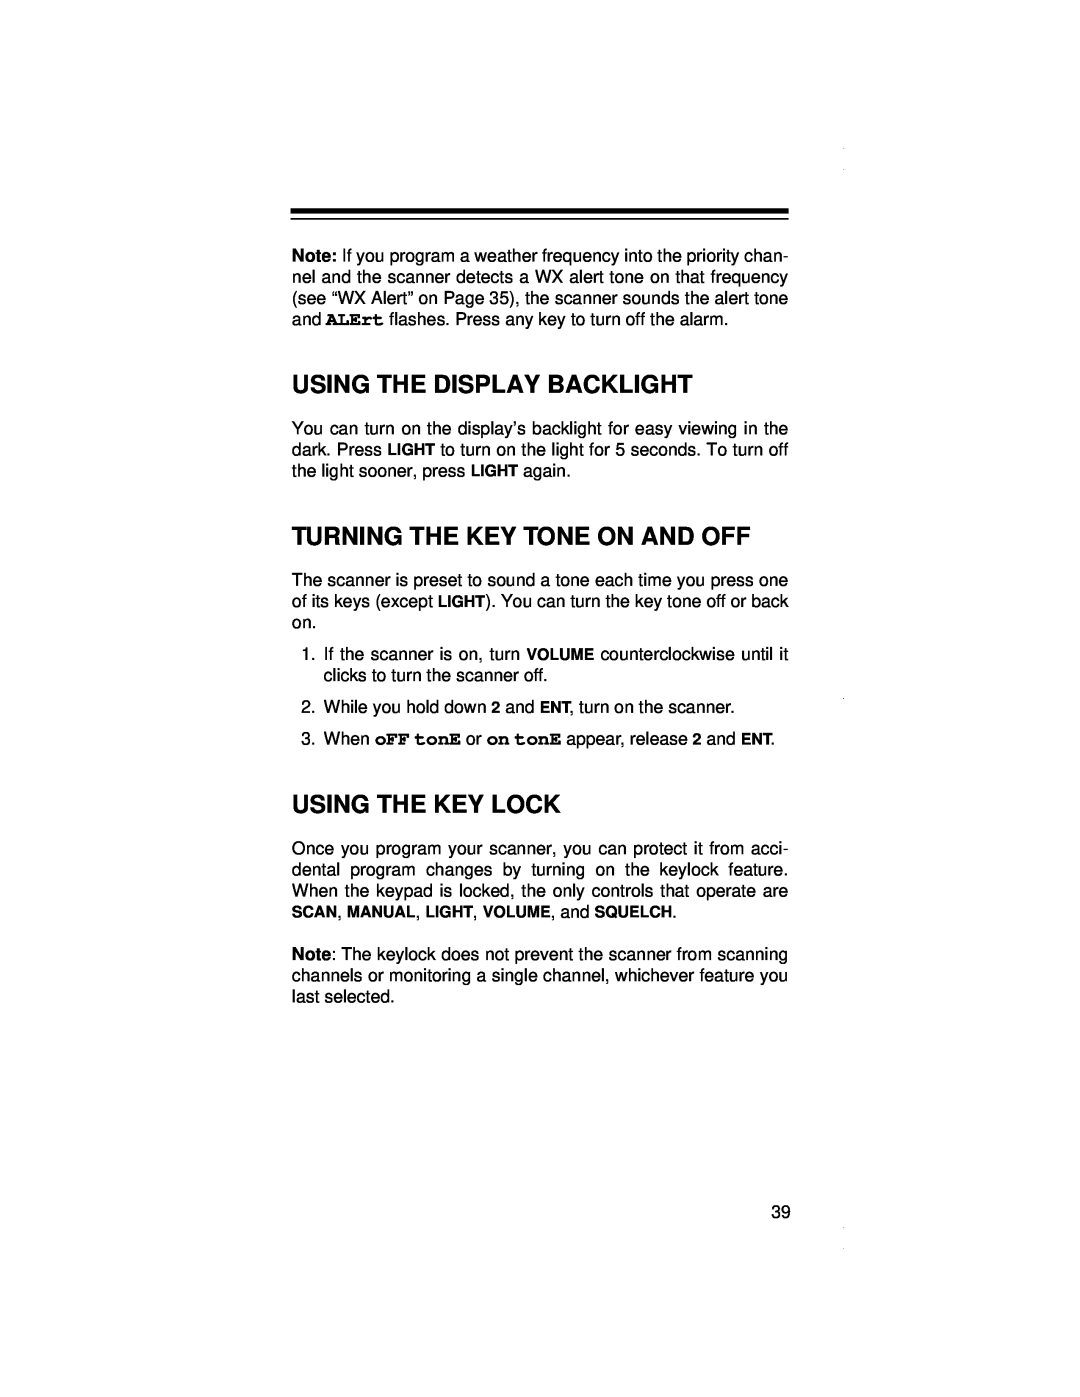 Radio Shack PRO-79 owner manual Using The Display Backlight, Turning The Key Tone On And Off, Using The Key Lock 